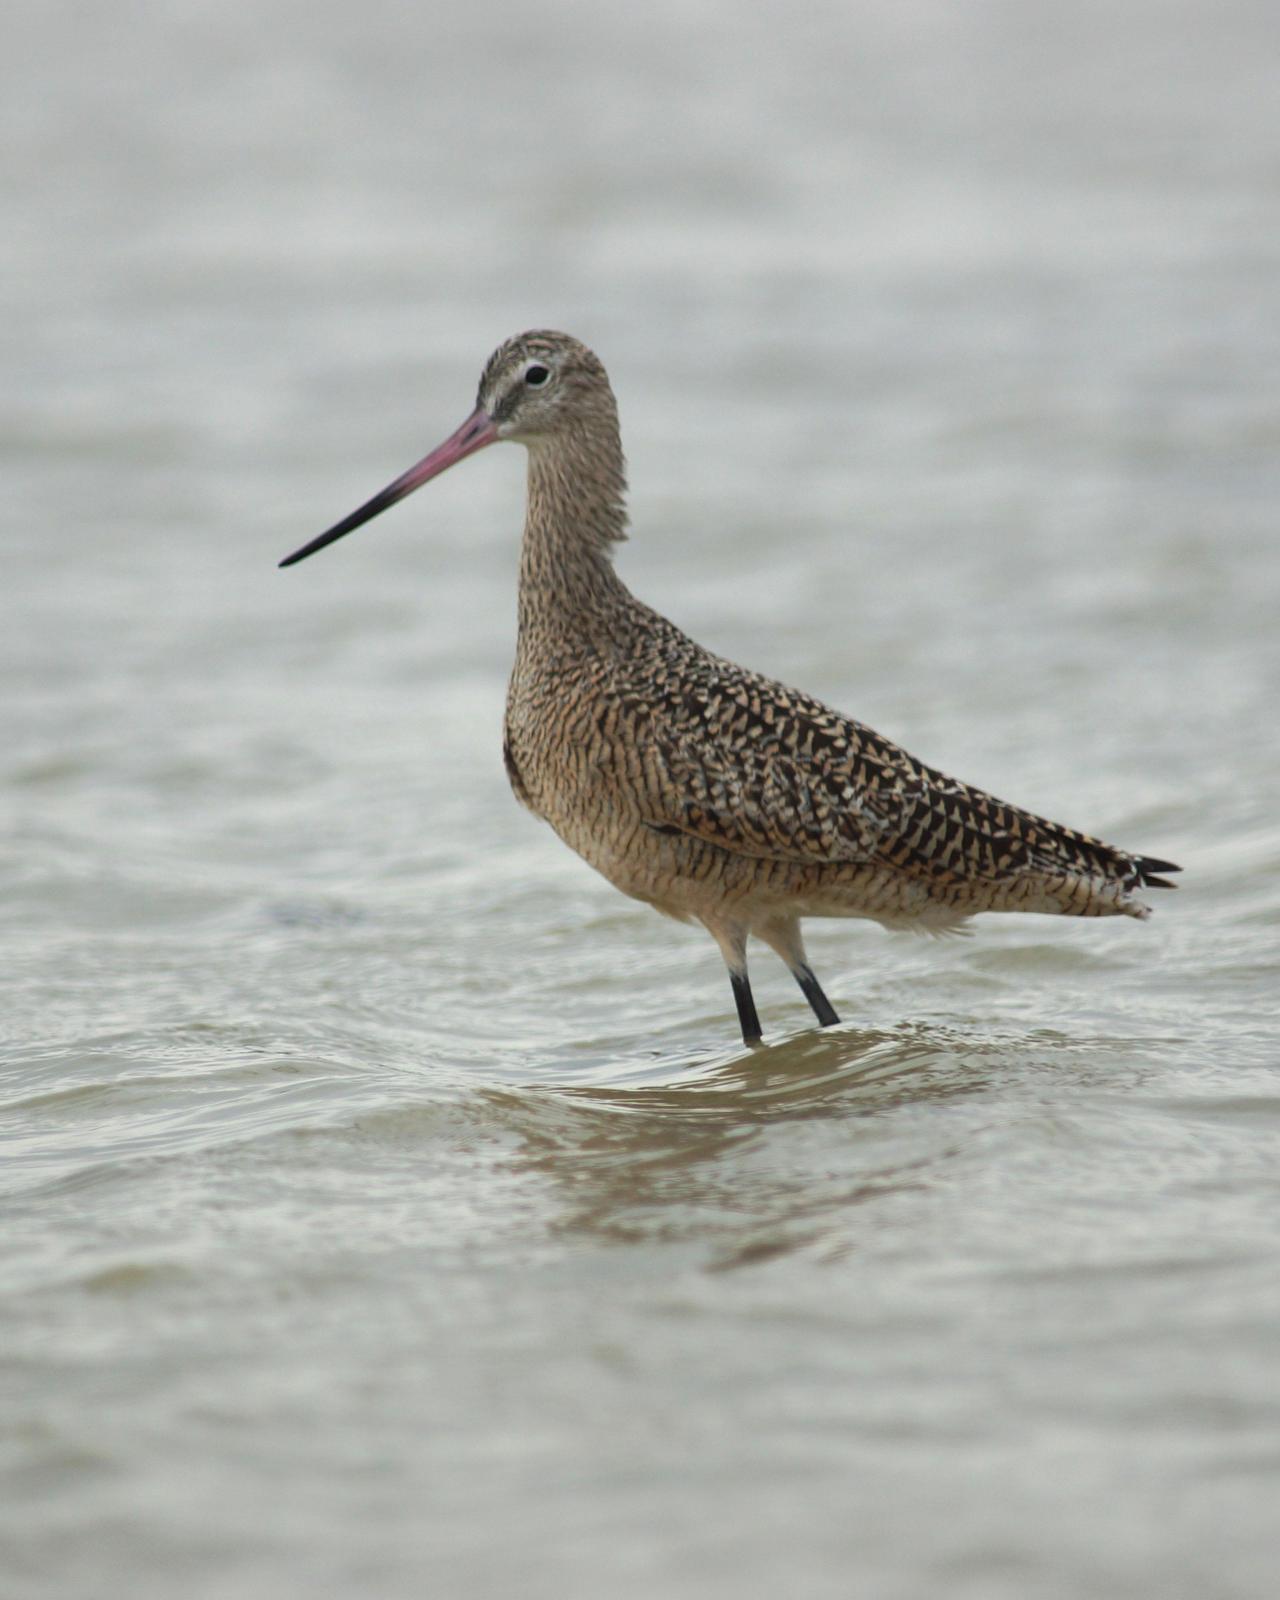 Marbled Godwit Photo by Steve Percival